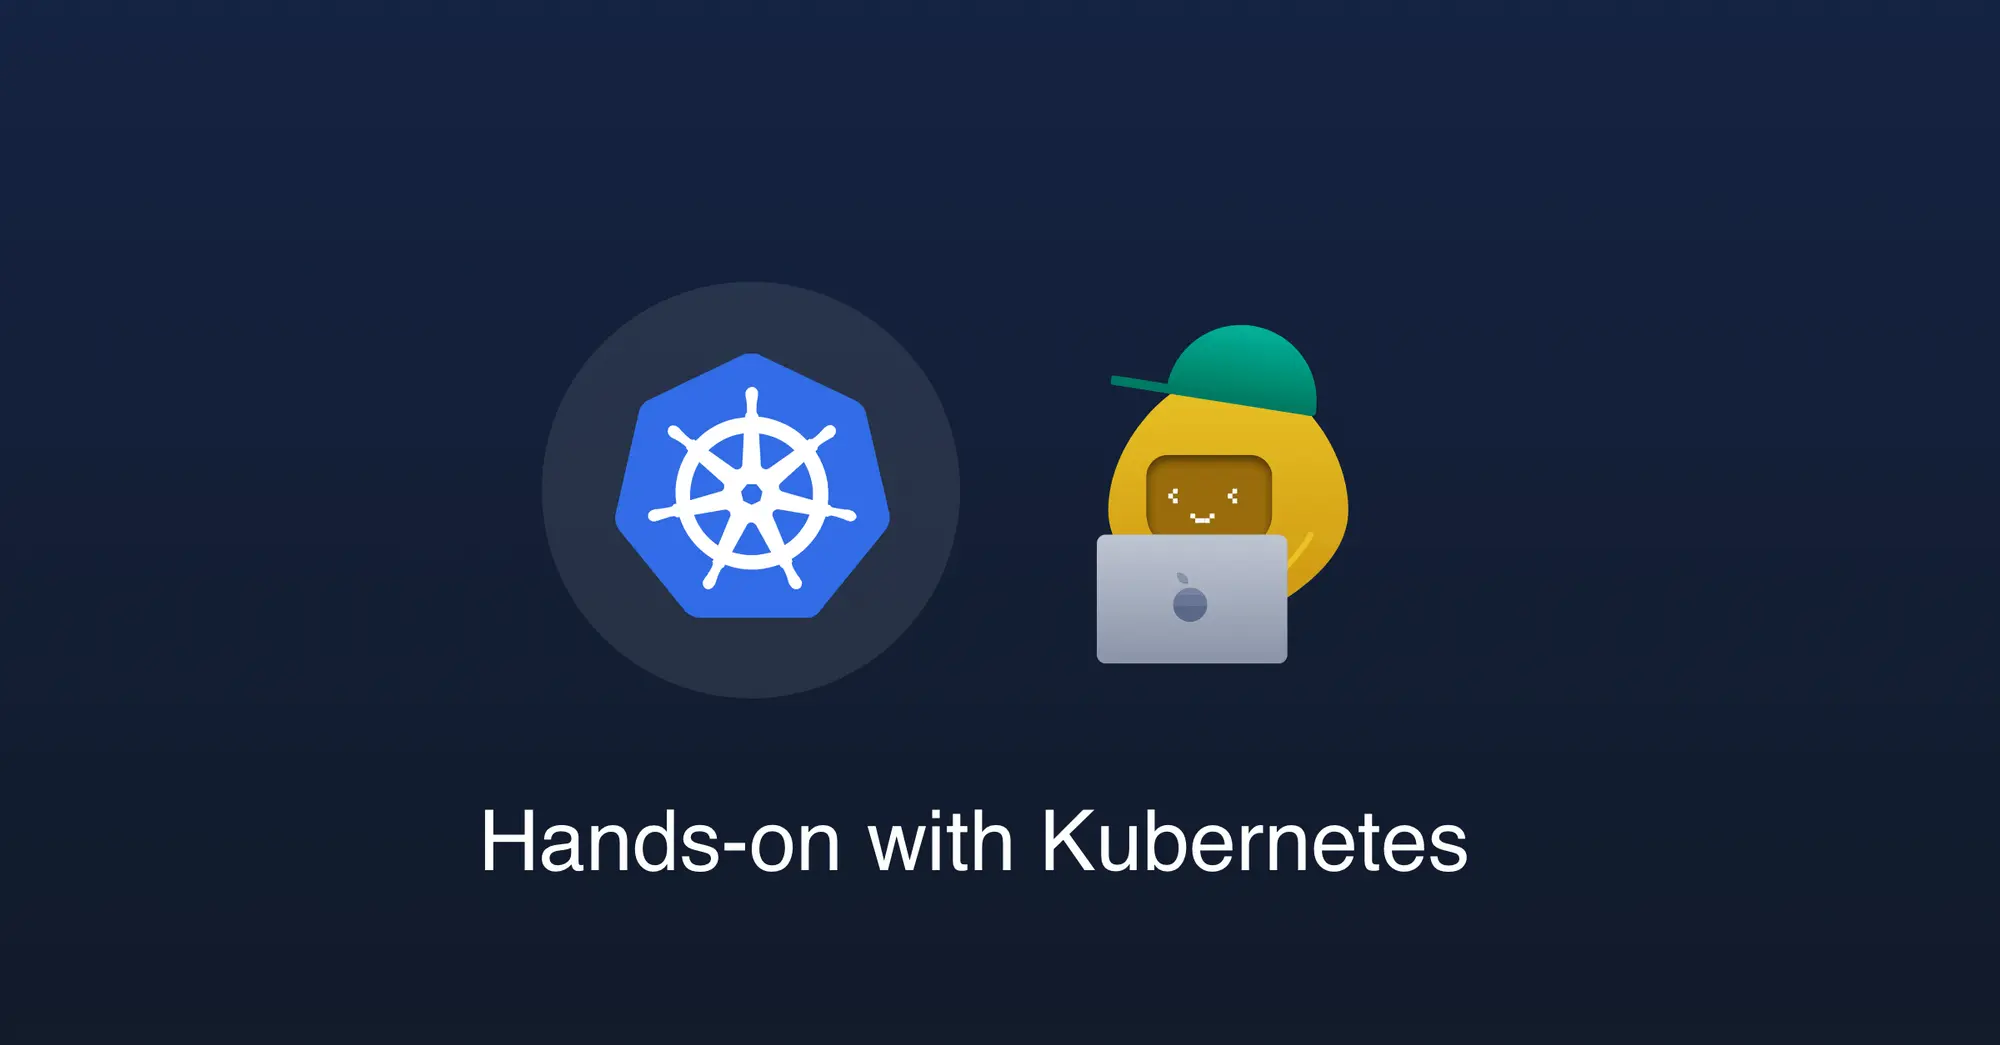 Deploy with kubectl - Hands-on with Kubernetes